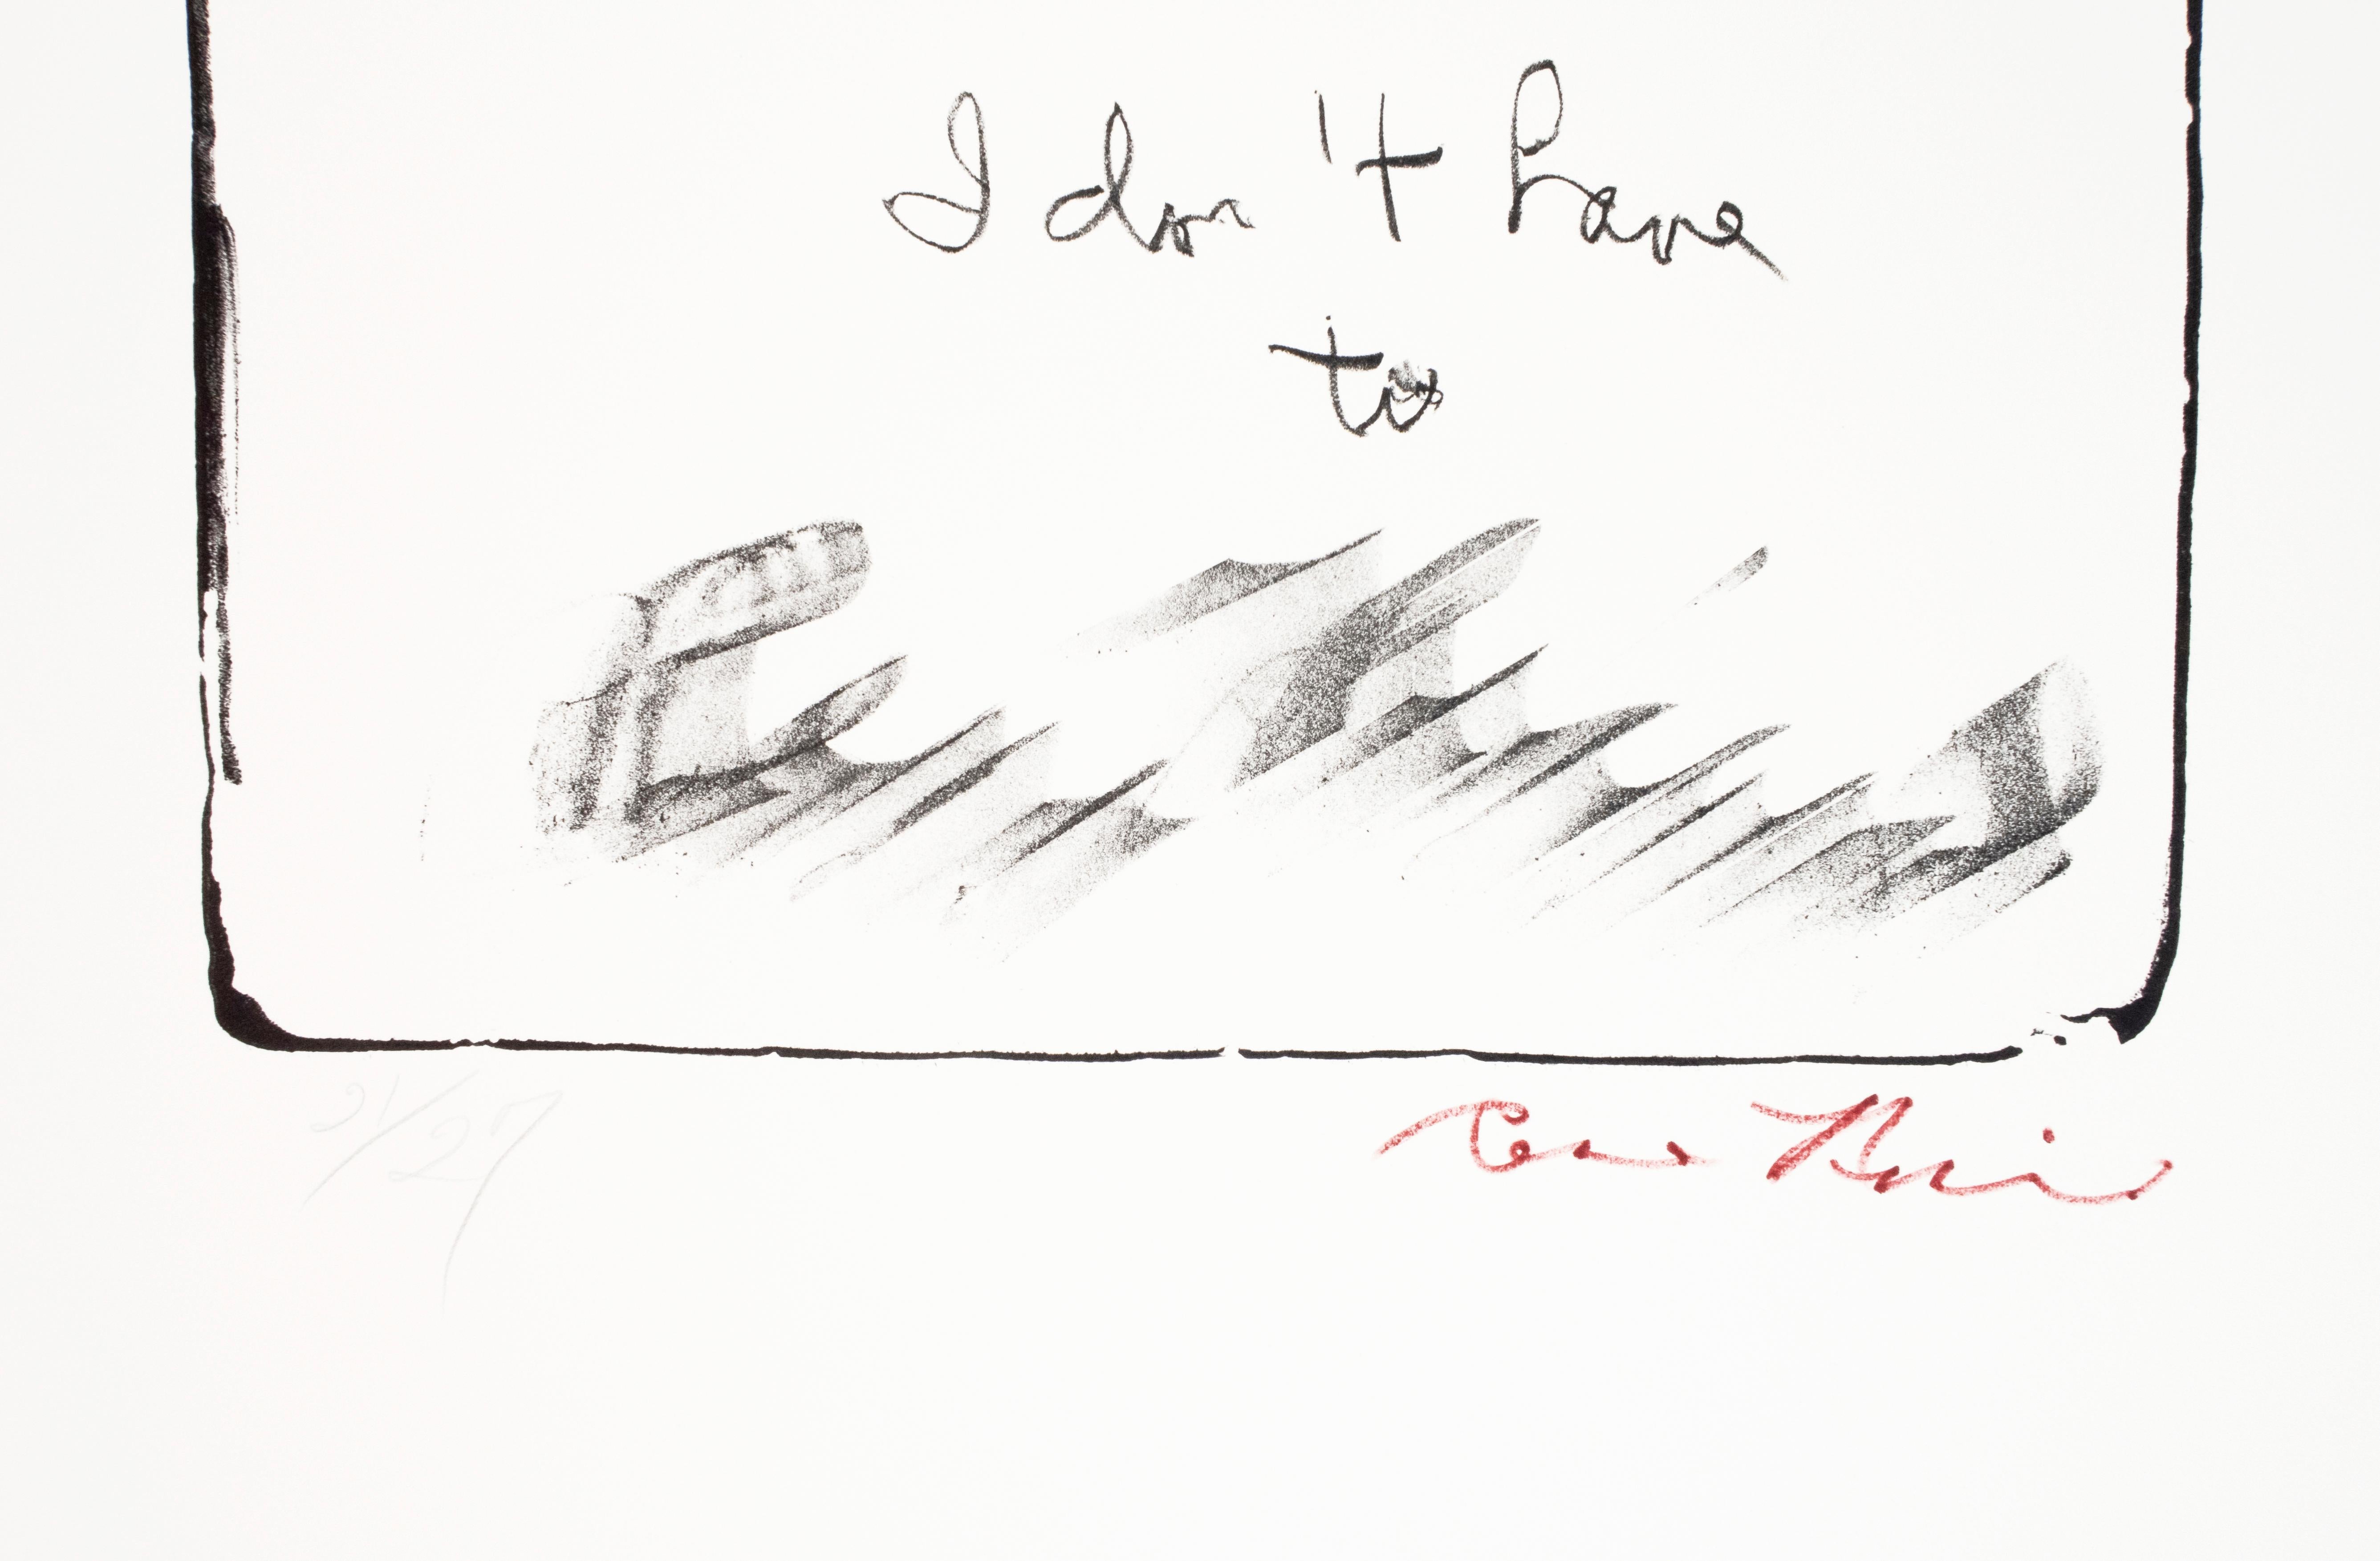 The title of this poetic, abstract work is written across the top of the sheet. The hand-written cursive below reads: 